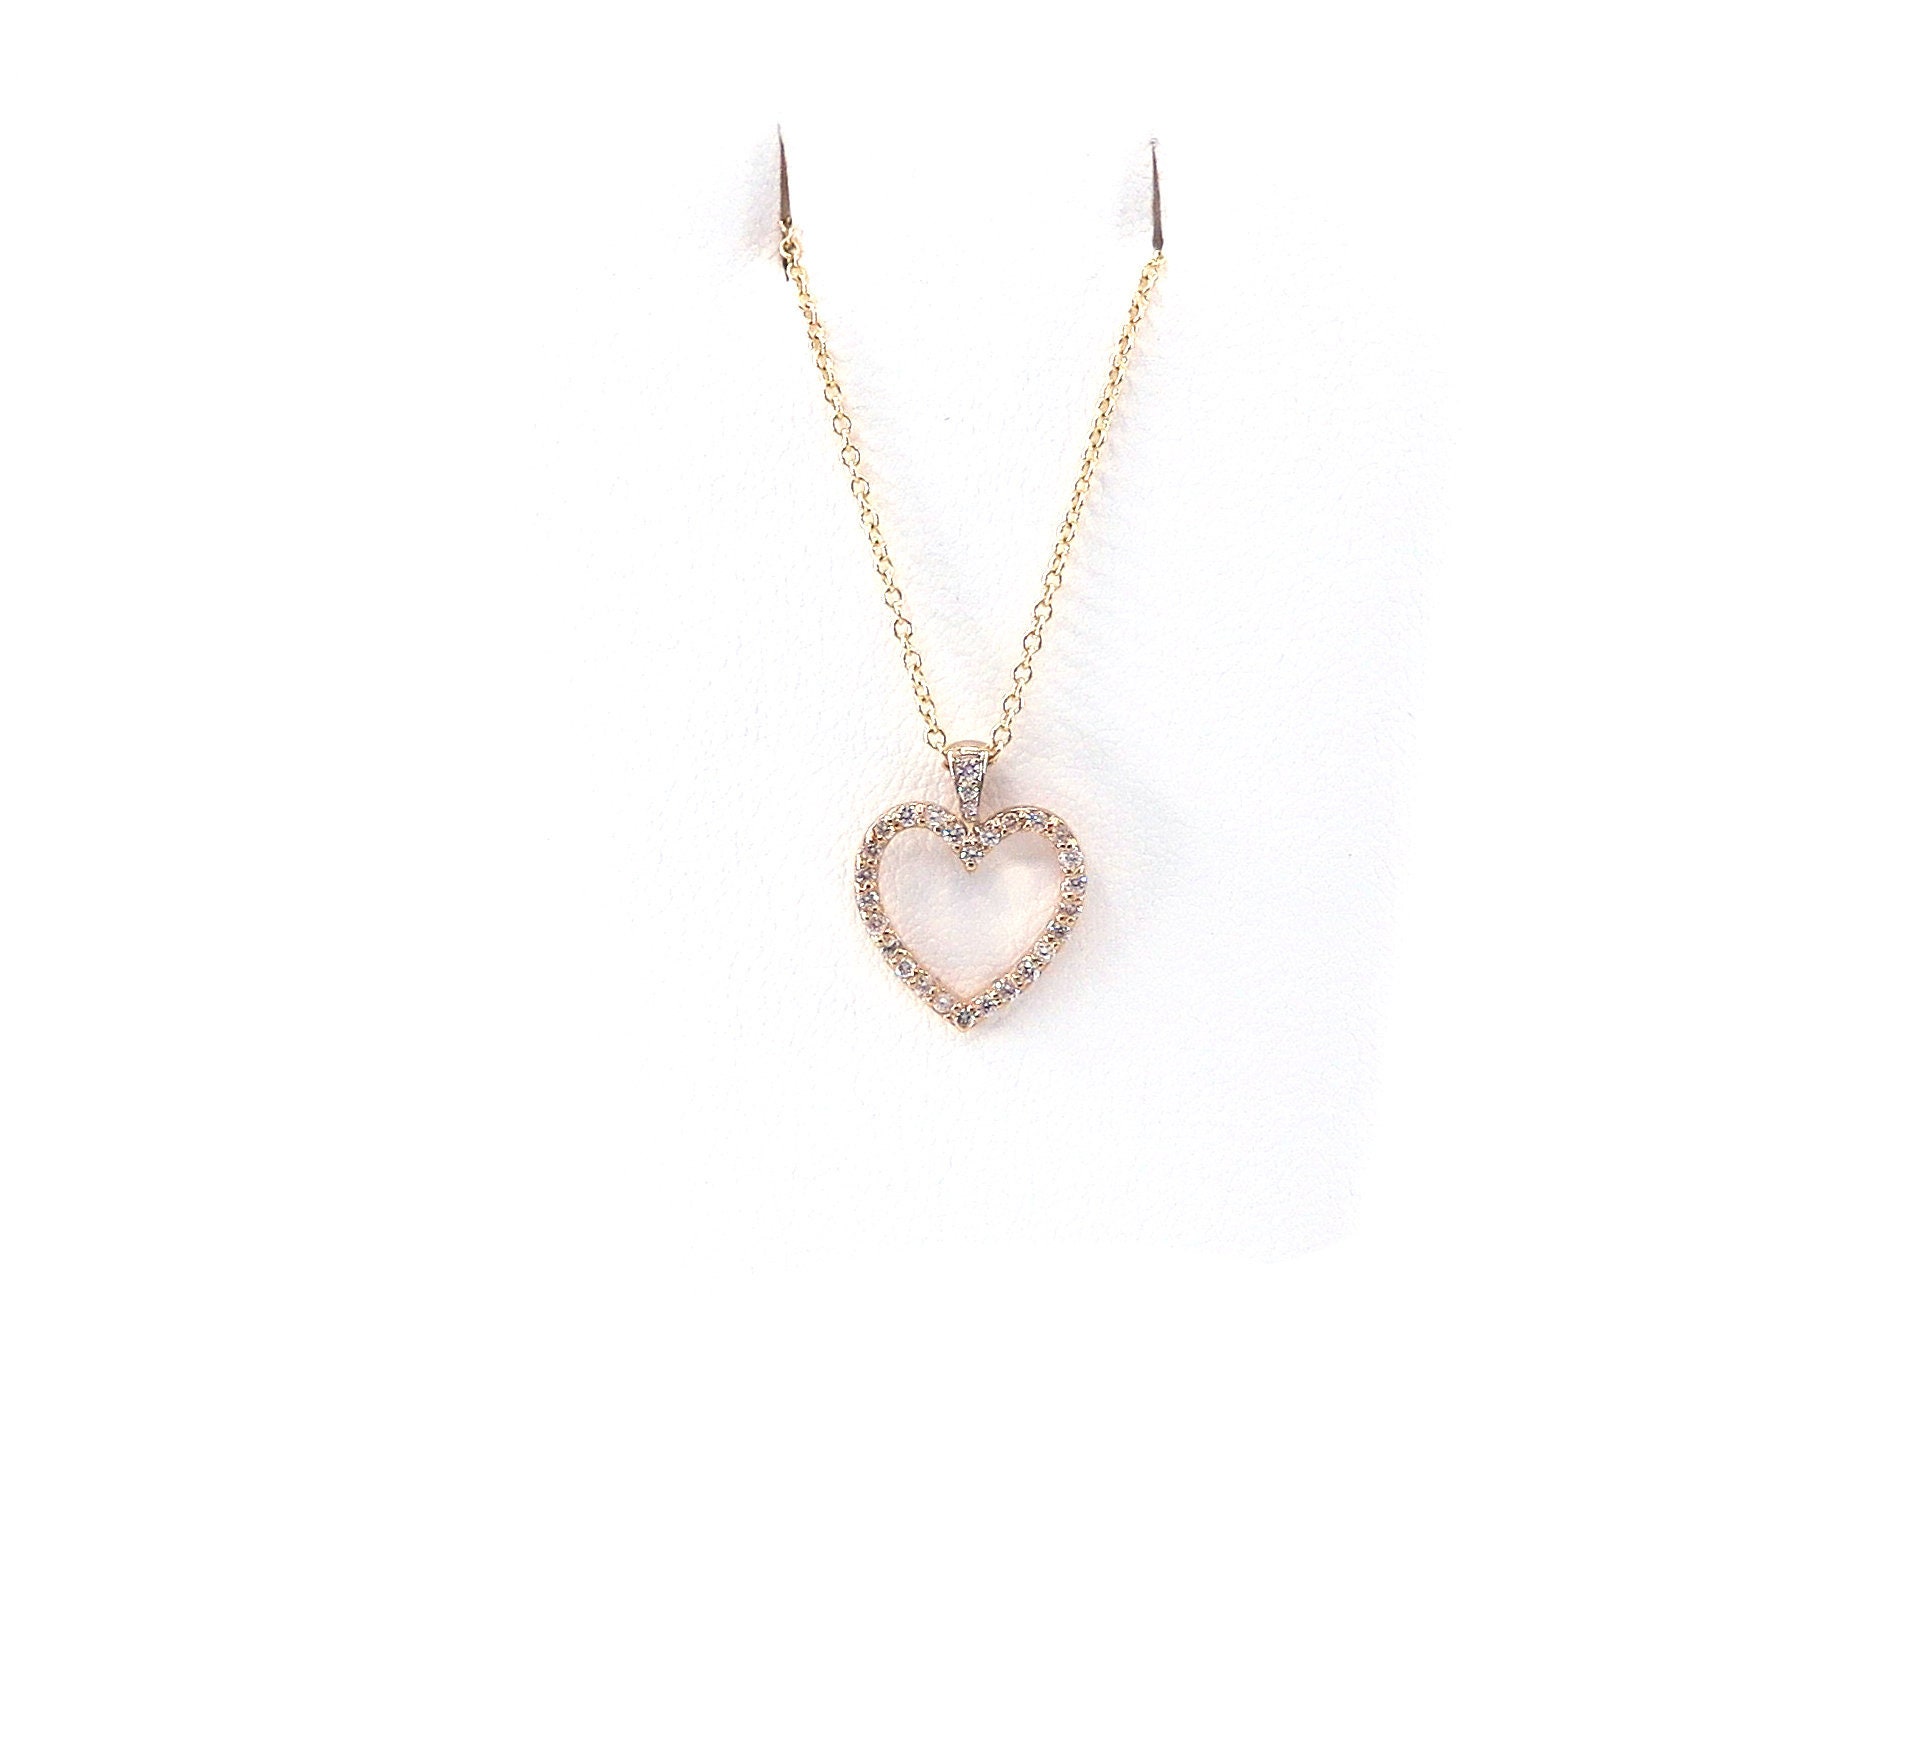 14 K Y Gold Diamond Heart Shaped Pendant, Gold, 2.7 grams, TW of ...